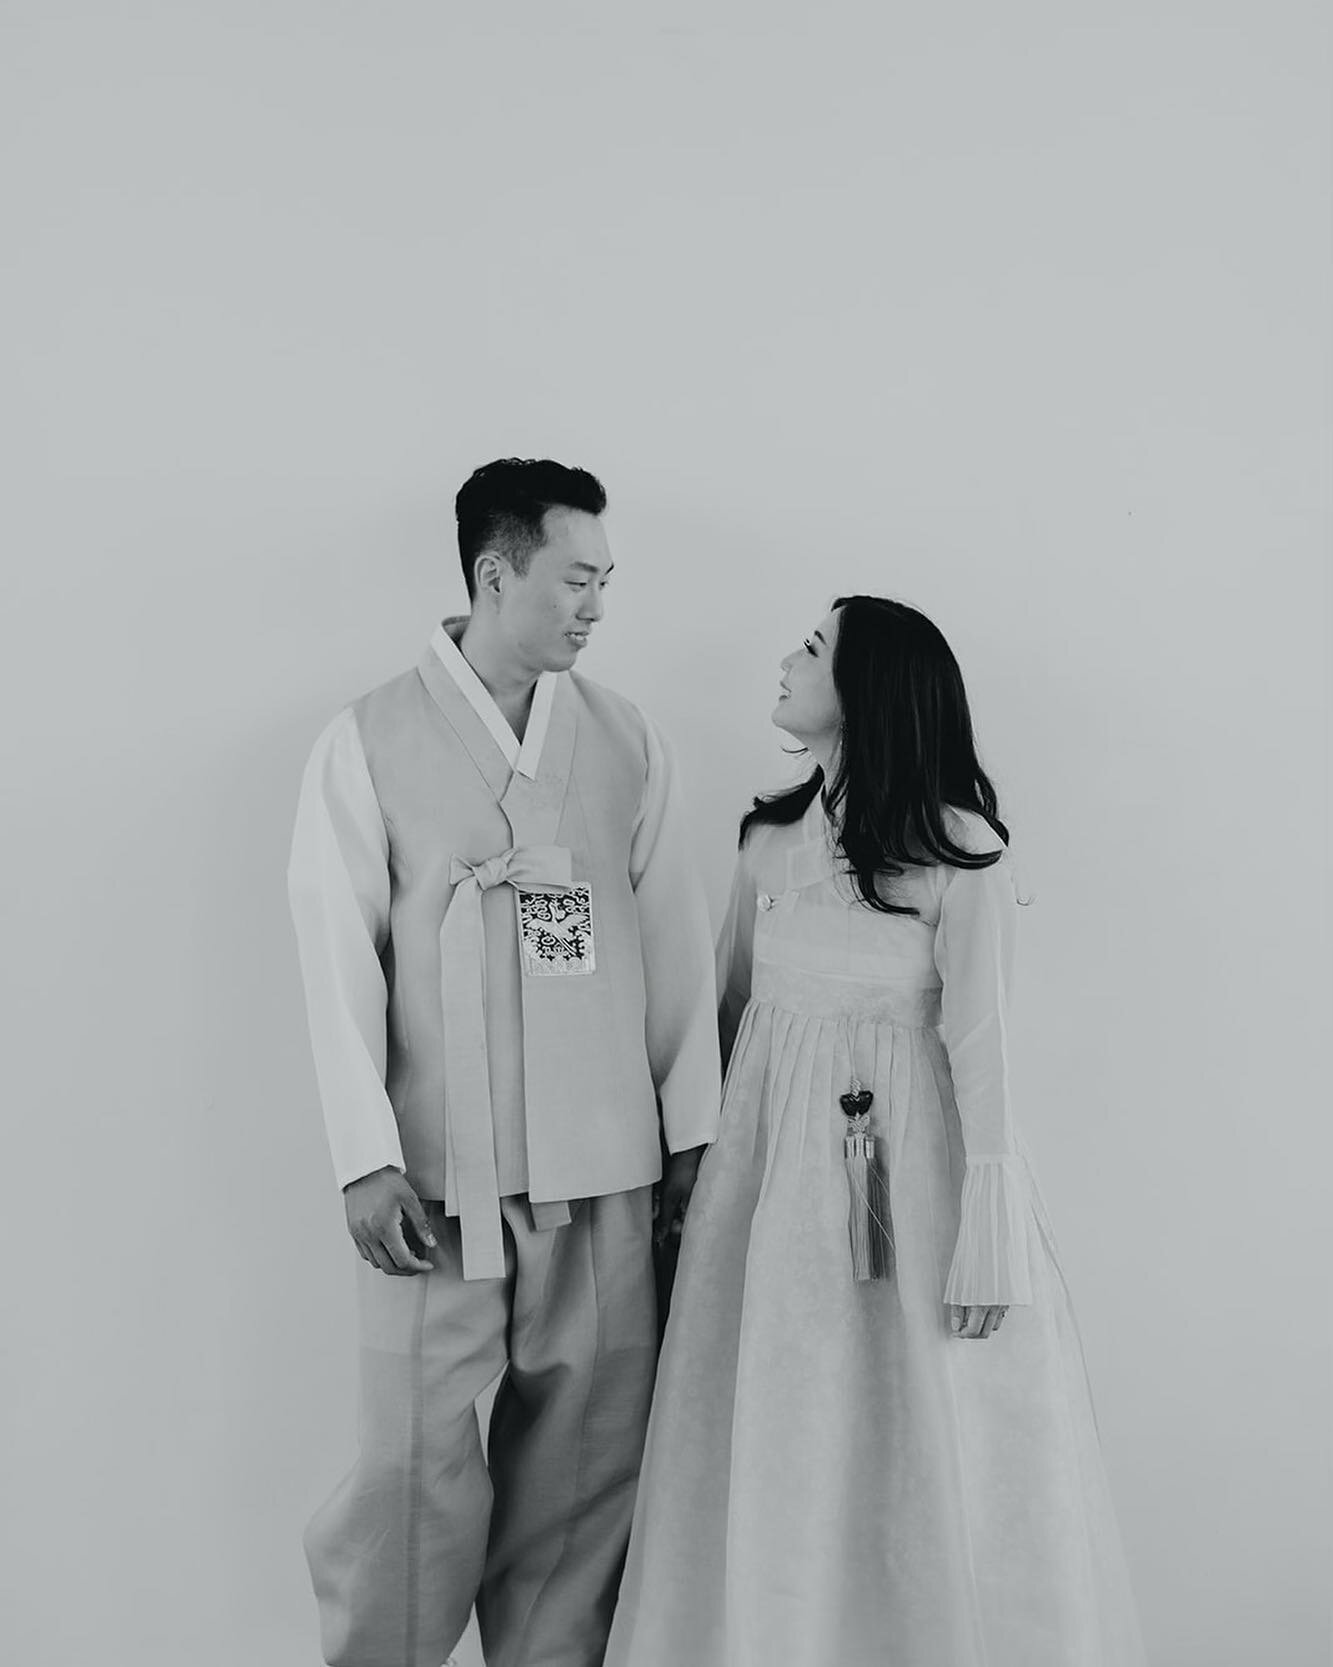 We love to see couples keep the Korean tradition alive. We're here for it. #paebaek is a fun way to incorporate Korean culture into your special wedding day.

Planning | Event Styling: @livelovecreate, @christineschang
Photographer: @kapsuleco
.
.

 